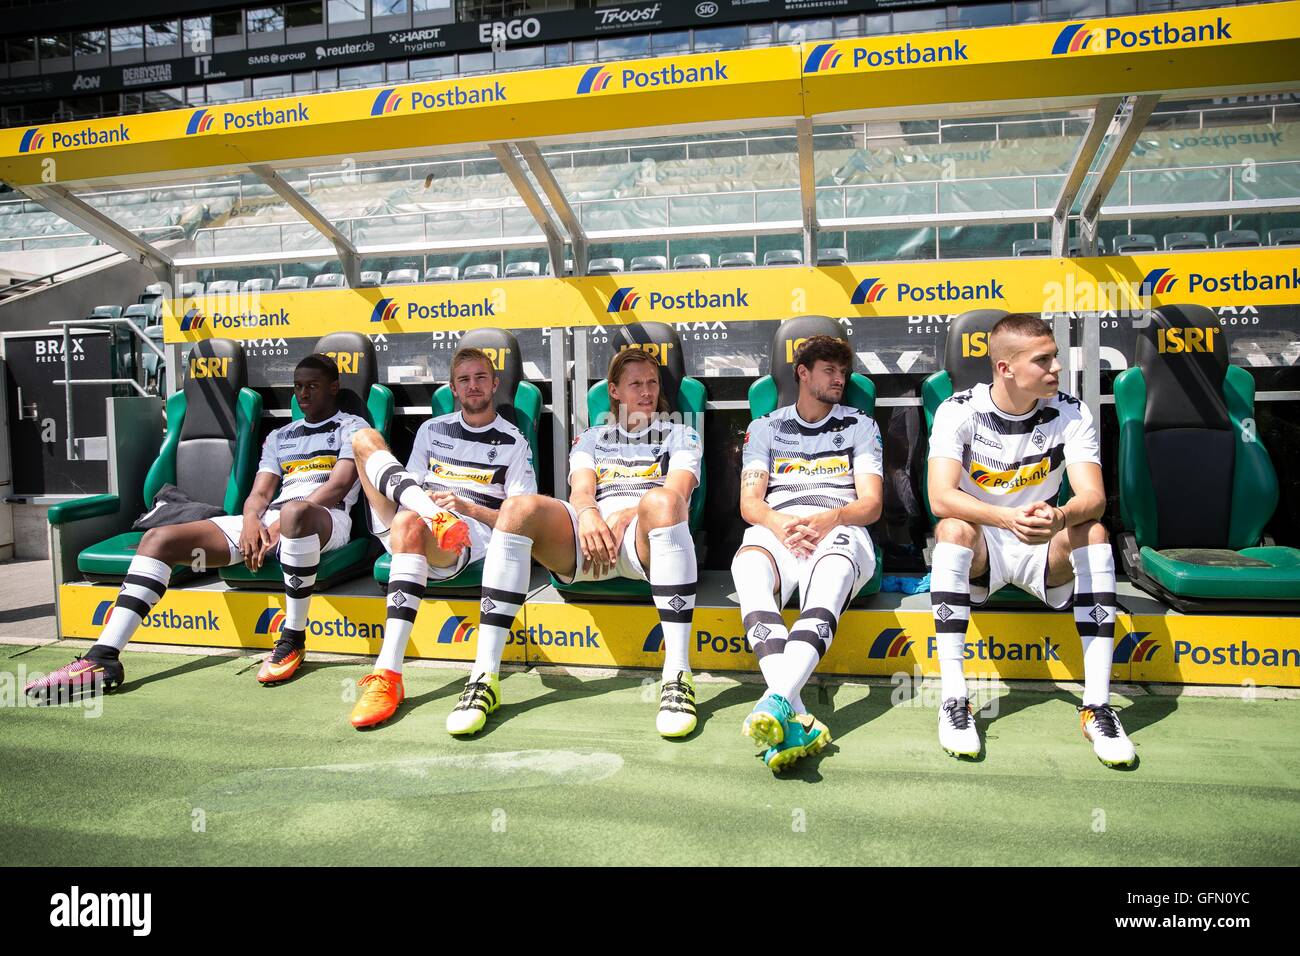 Borussia Moenchengladbach players Mamadou Doucoure, Christoph Kramer,  Jannik Vestergaard, Tobias Strobl and Laszlo Benes sit on the bank for a  photo shoot for the 2016/17 season in the Borussia Park in Moenchengladbach,